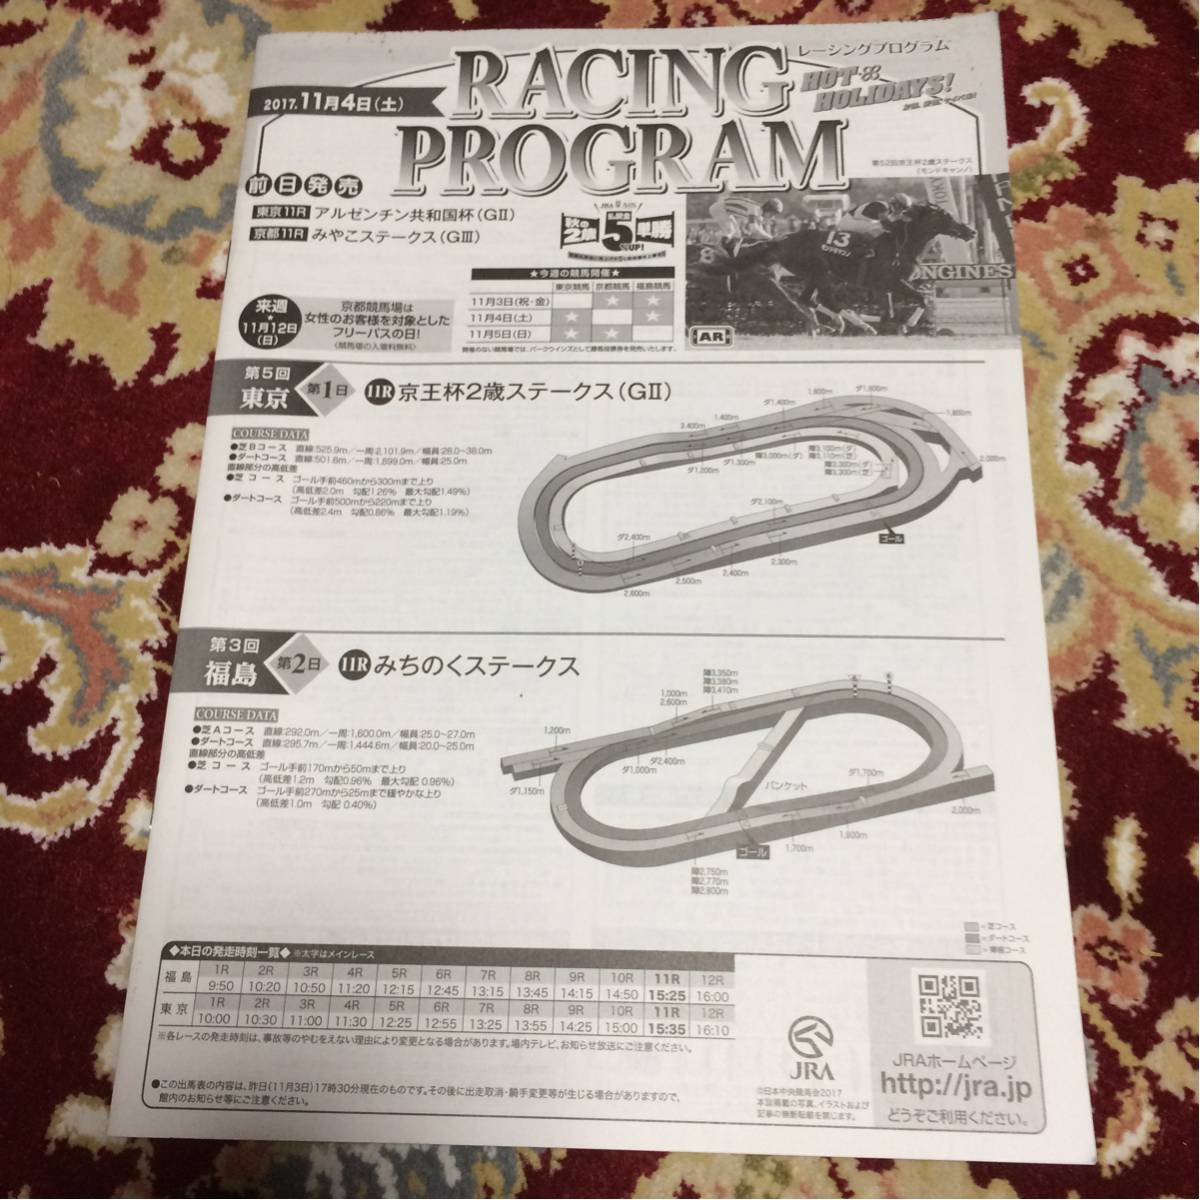 JRA Racing Program 2017.11 month 4 day ( earth ) capital . cup 2 -years old stay ks(GⅡ),... . stay ks